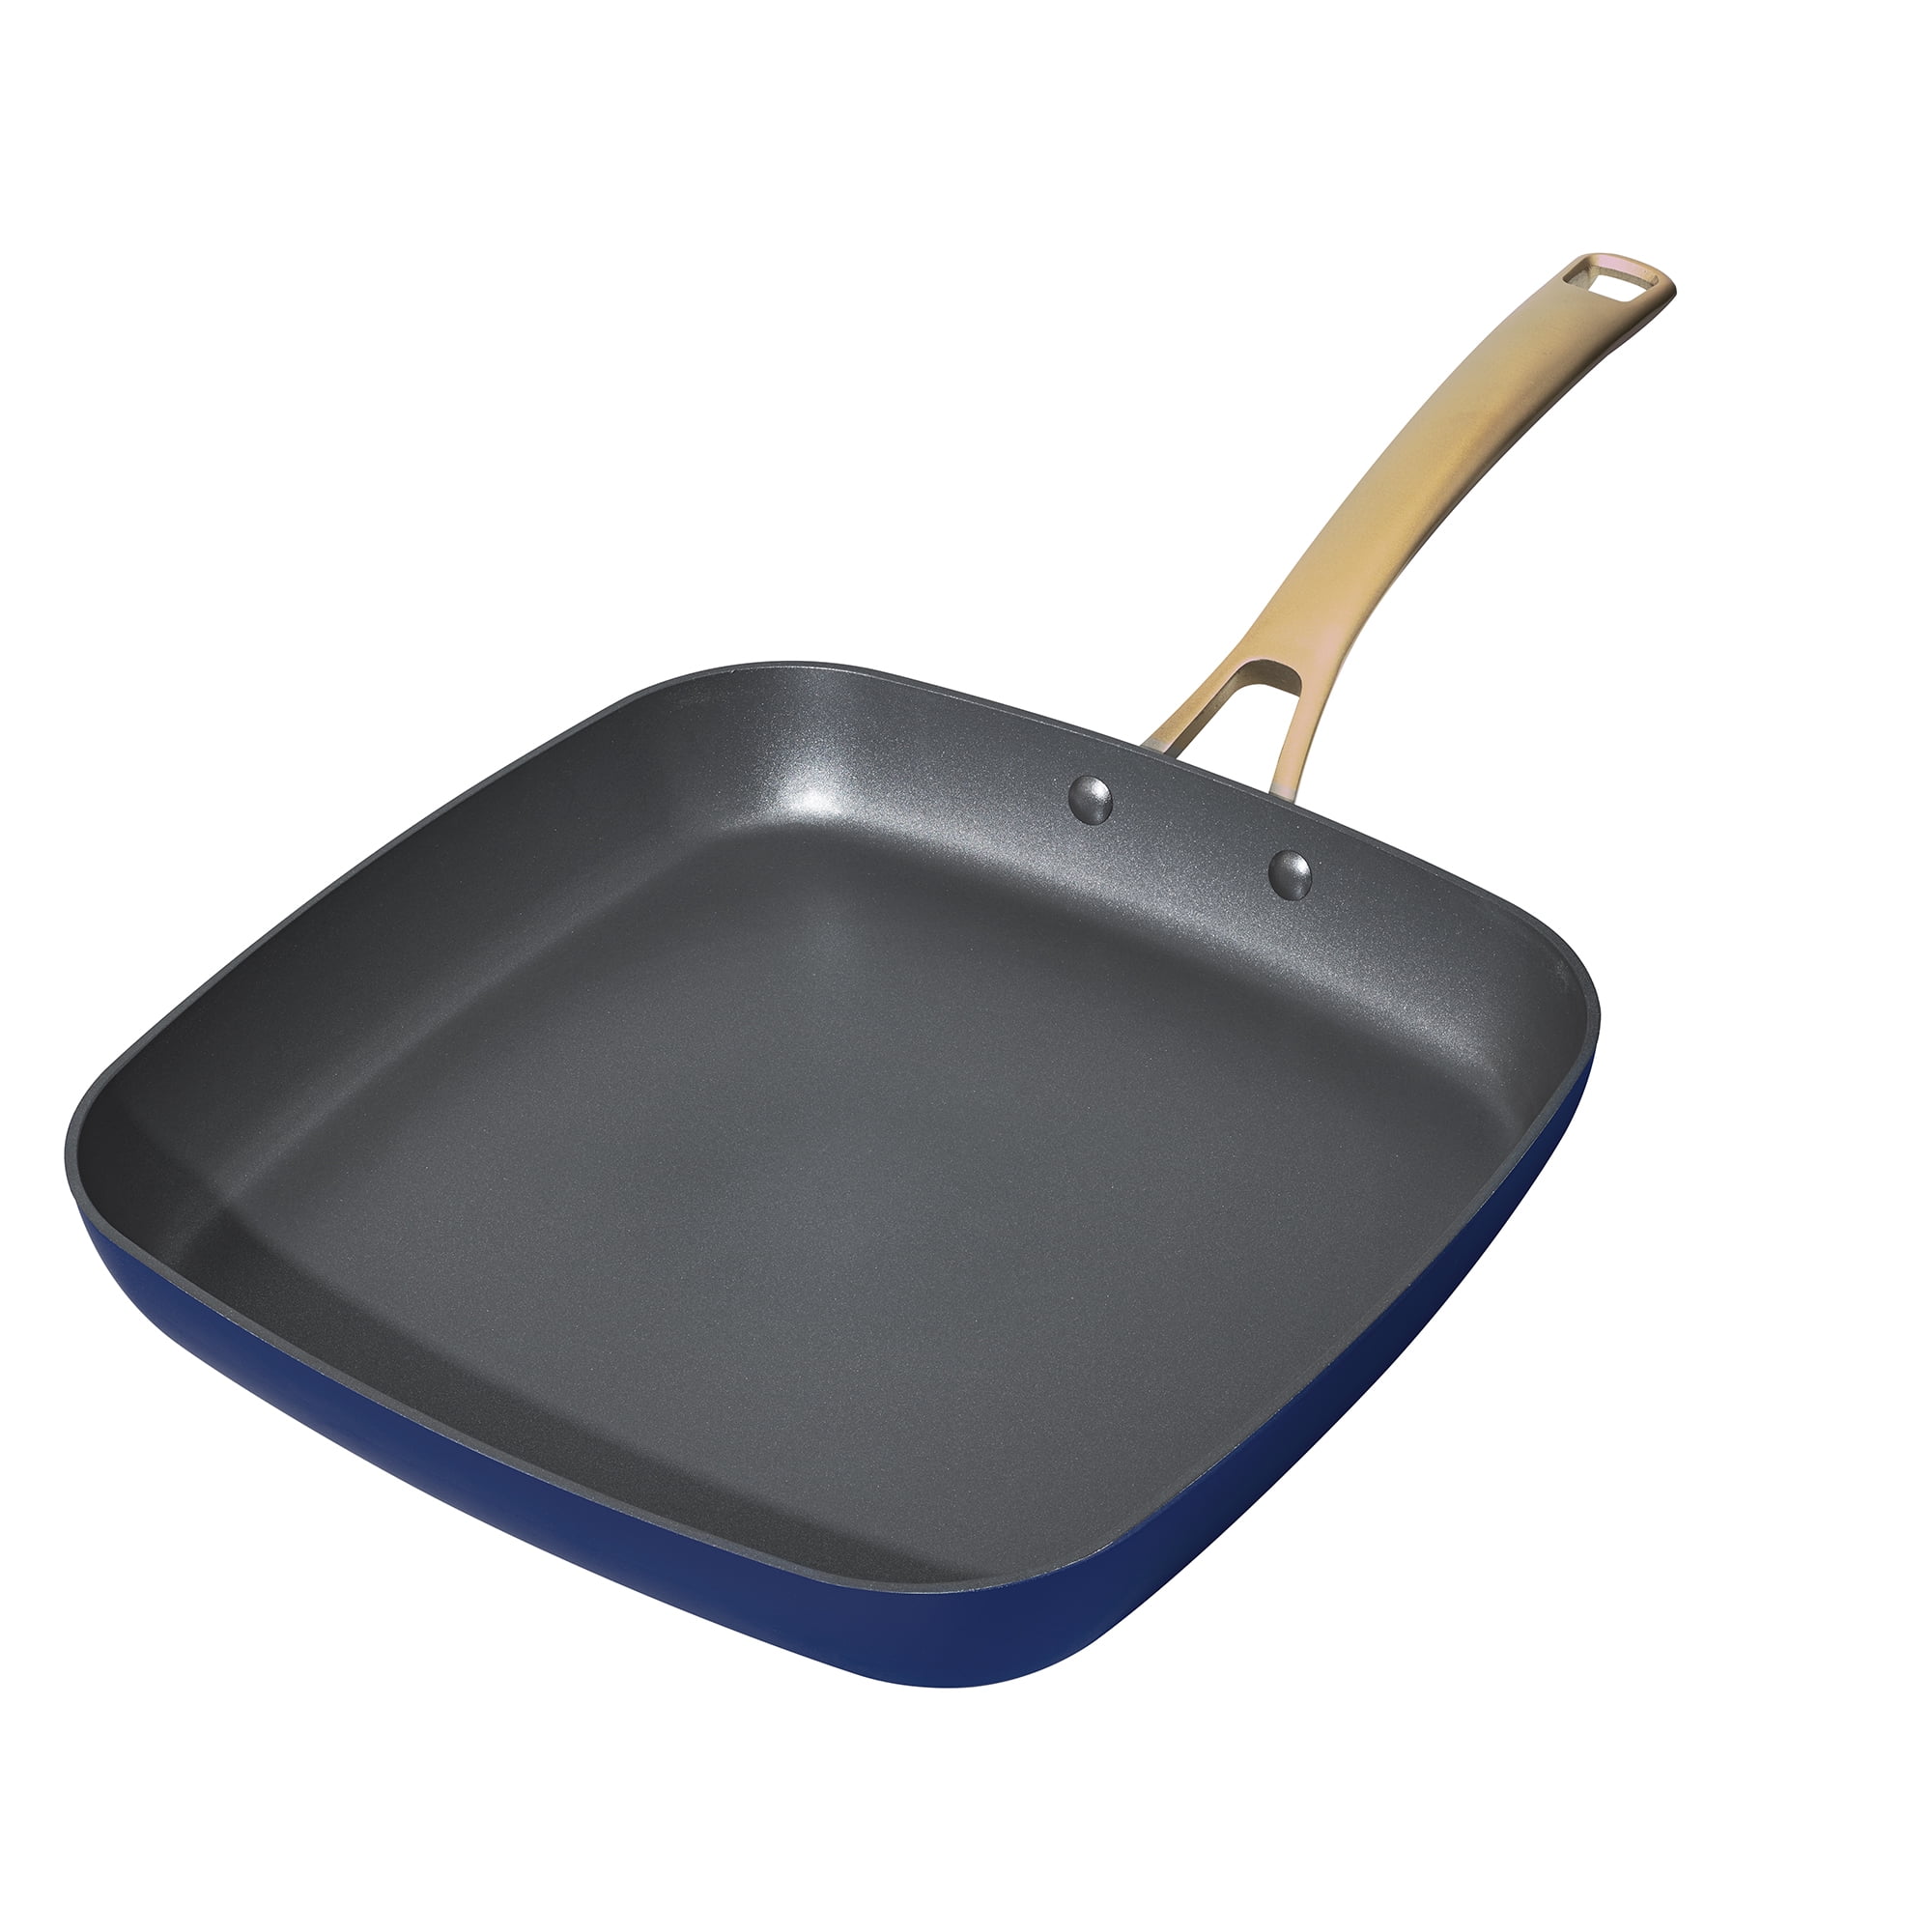 Beautiful 11" Square Griddle Pan, Blueberry Pie by Drew Barrymore